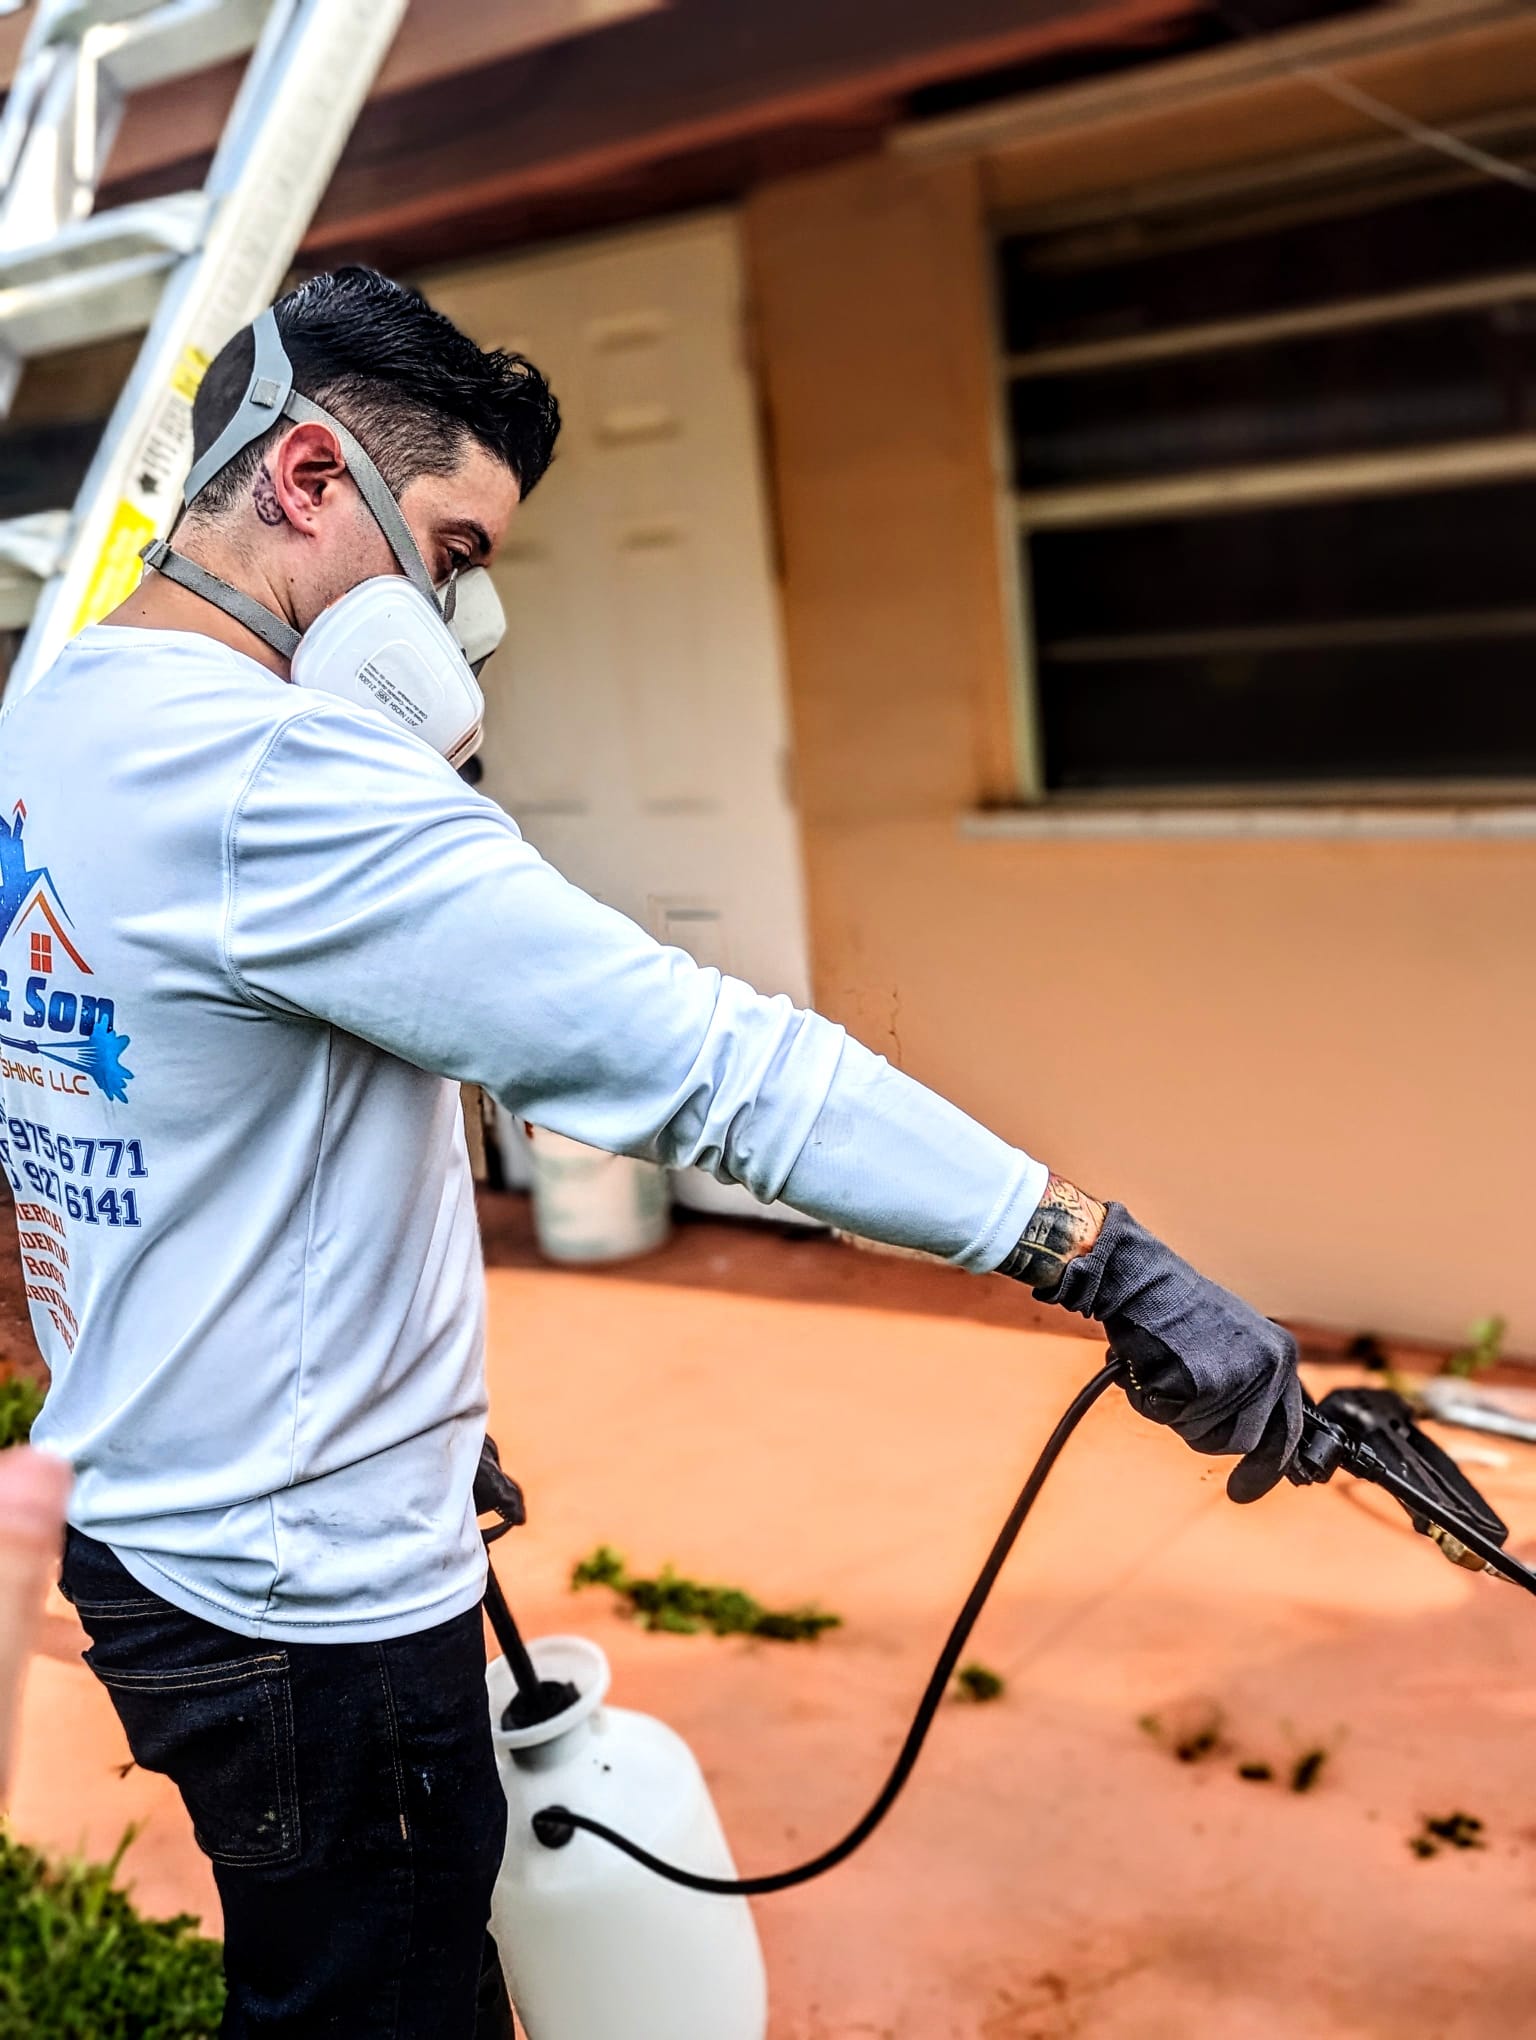 henry deleon using a chemical sprayer while wearing a face mask